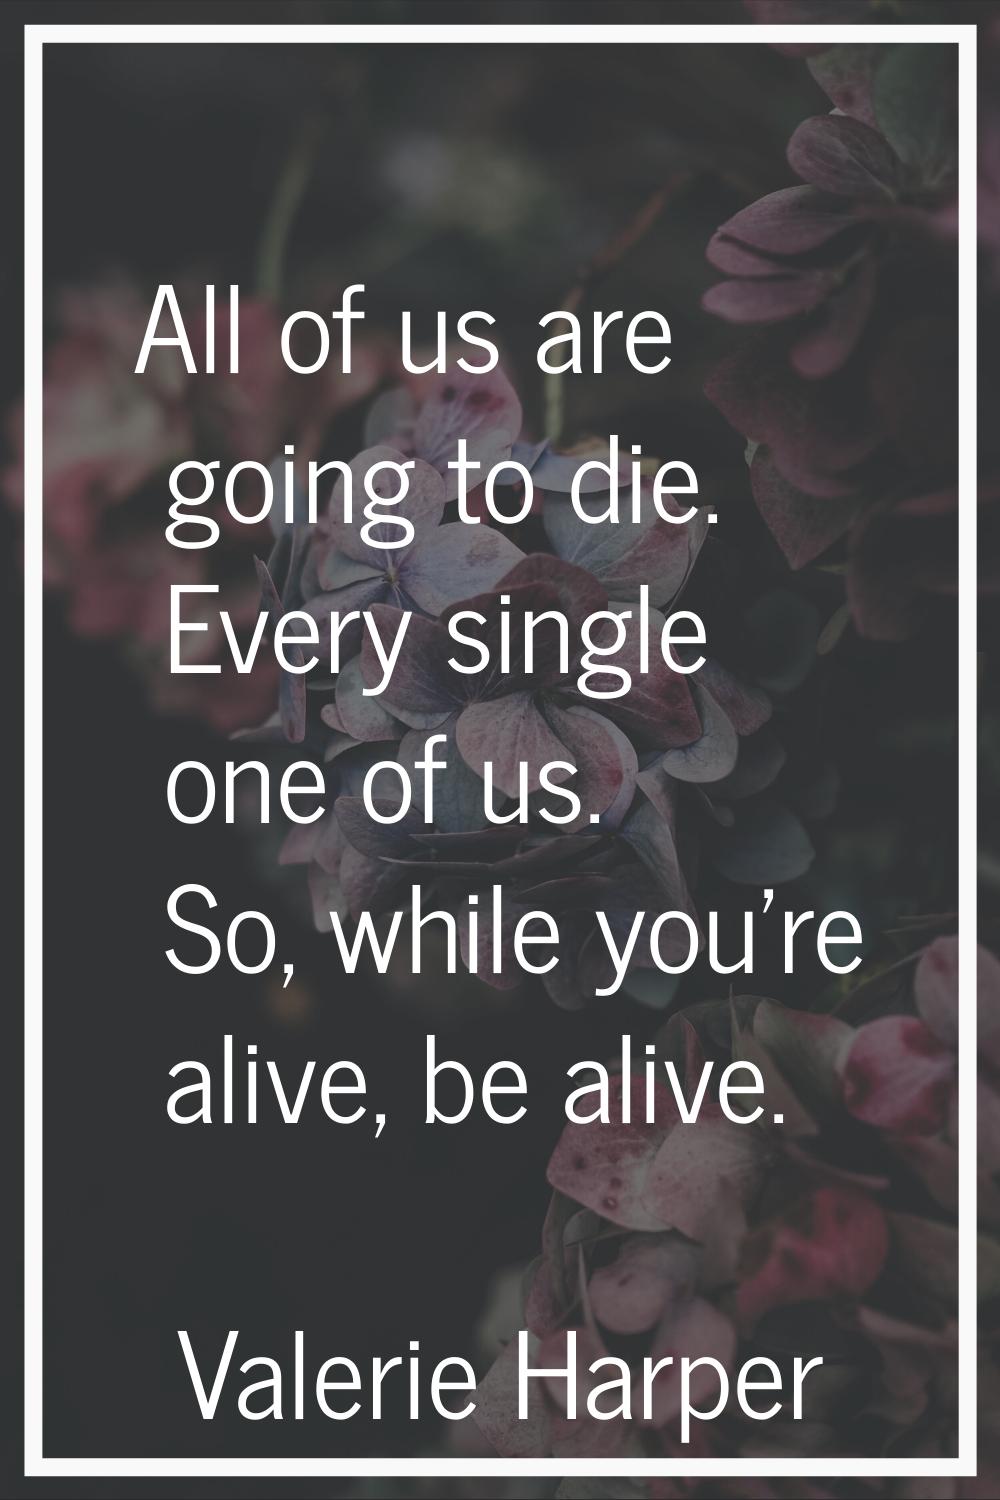 All of us are going to die. Every single one of us. So, while you're alive, be alive.